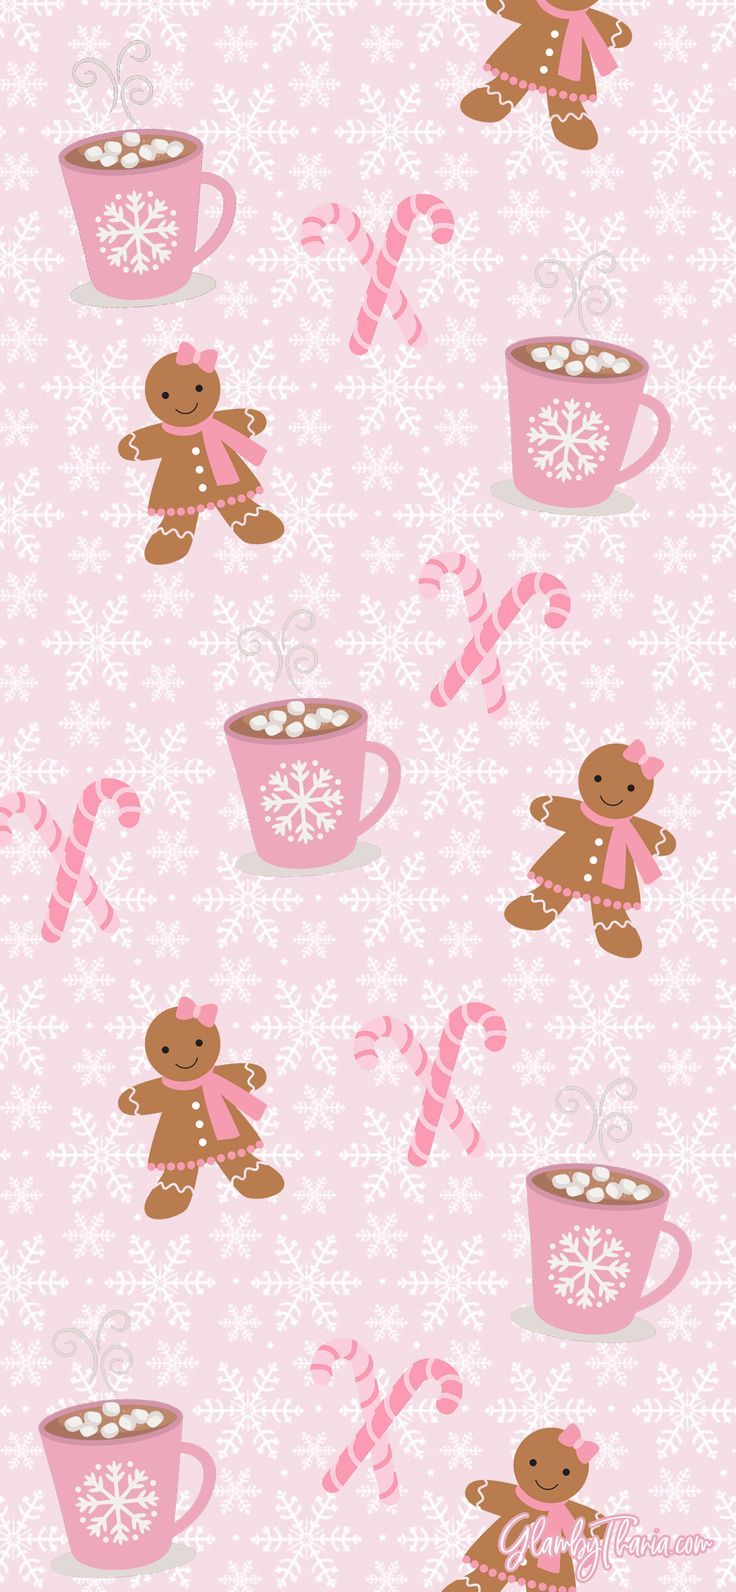 A cute pink Christmas pattern with gingerbread men, candy canes, hot cocoa, and snowflakes. - Candy cane